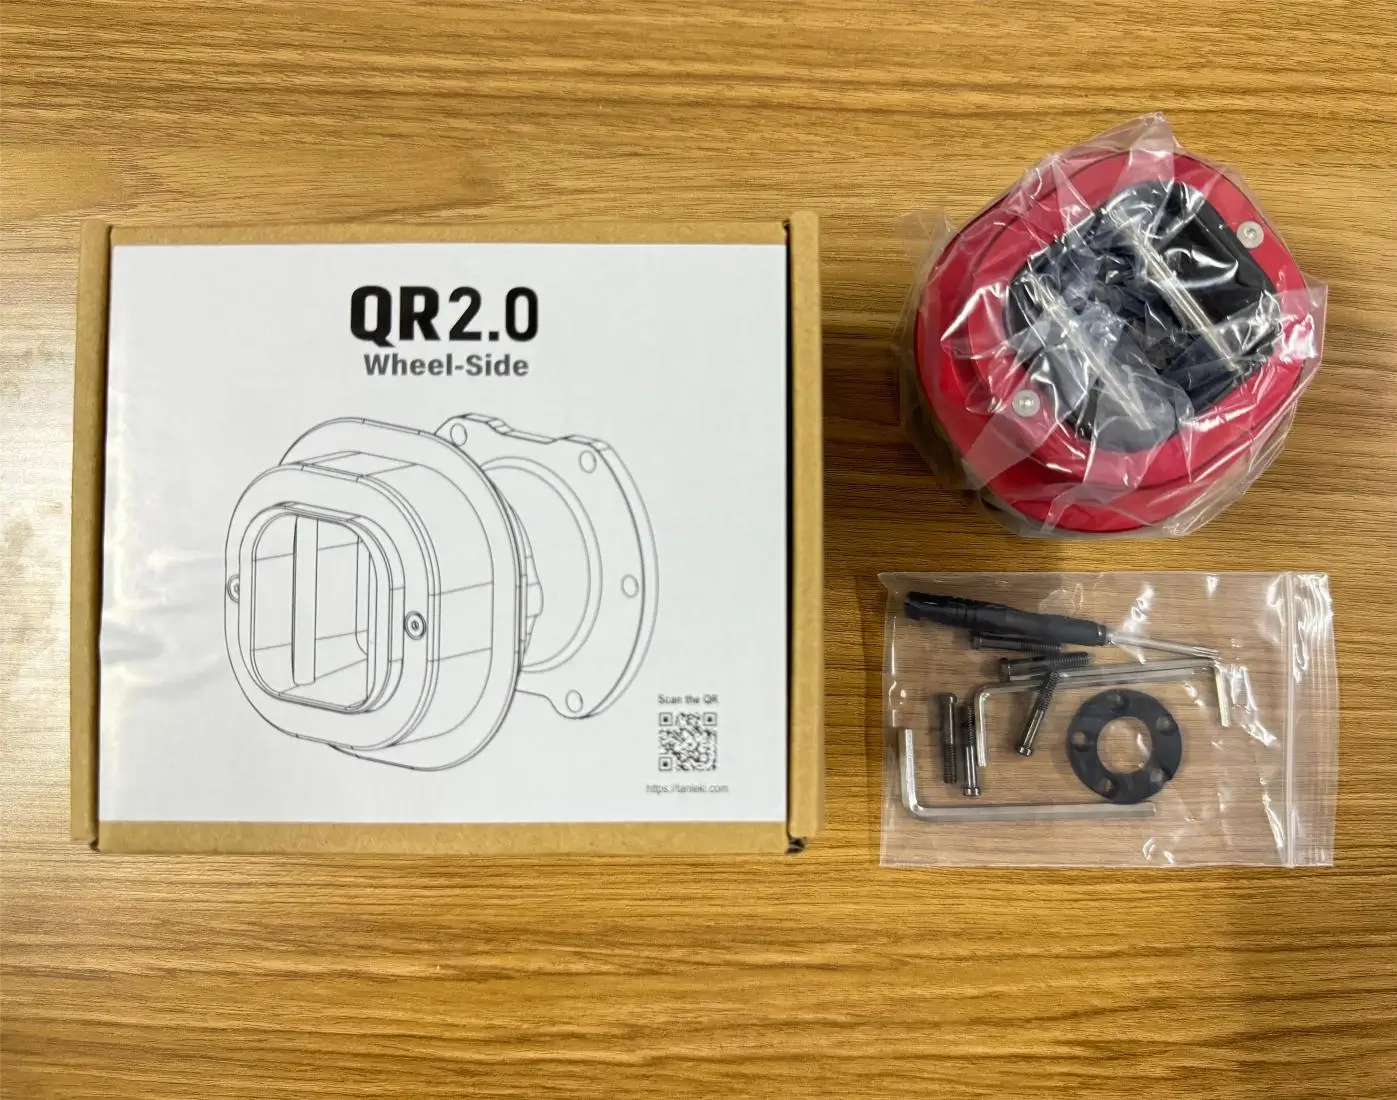 Newest QR2 Upgrade Wheel-sides Adapted for Fanatec Steering Wheel Accessories Qr2 Pro Wheel Sides Red Blue etc. Available